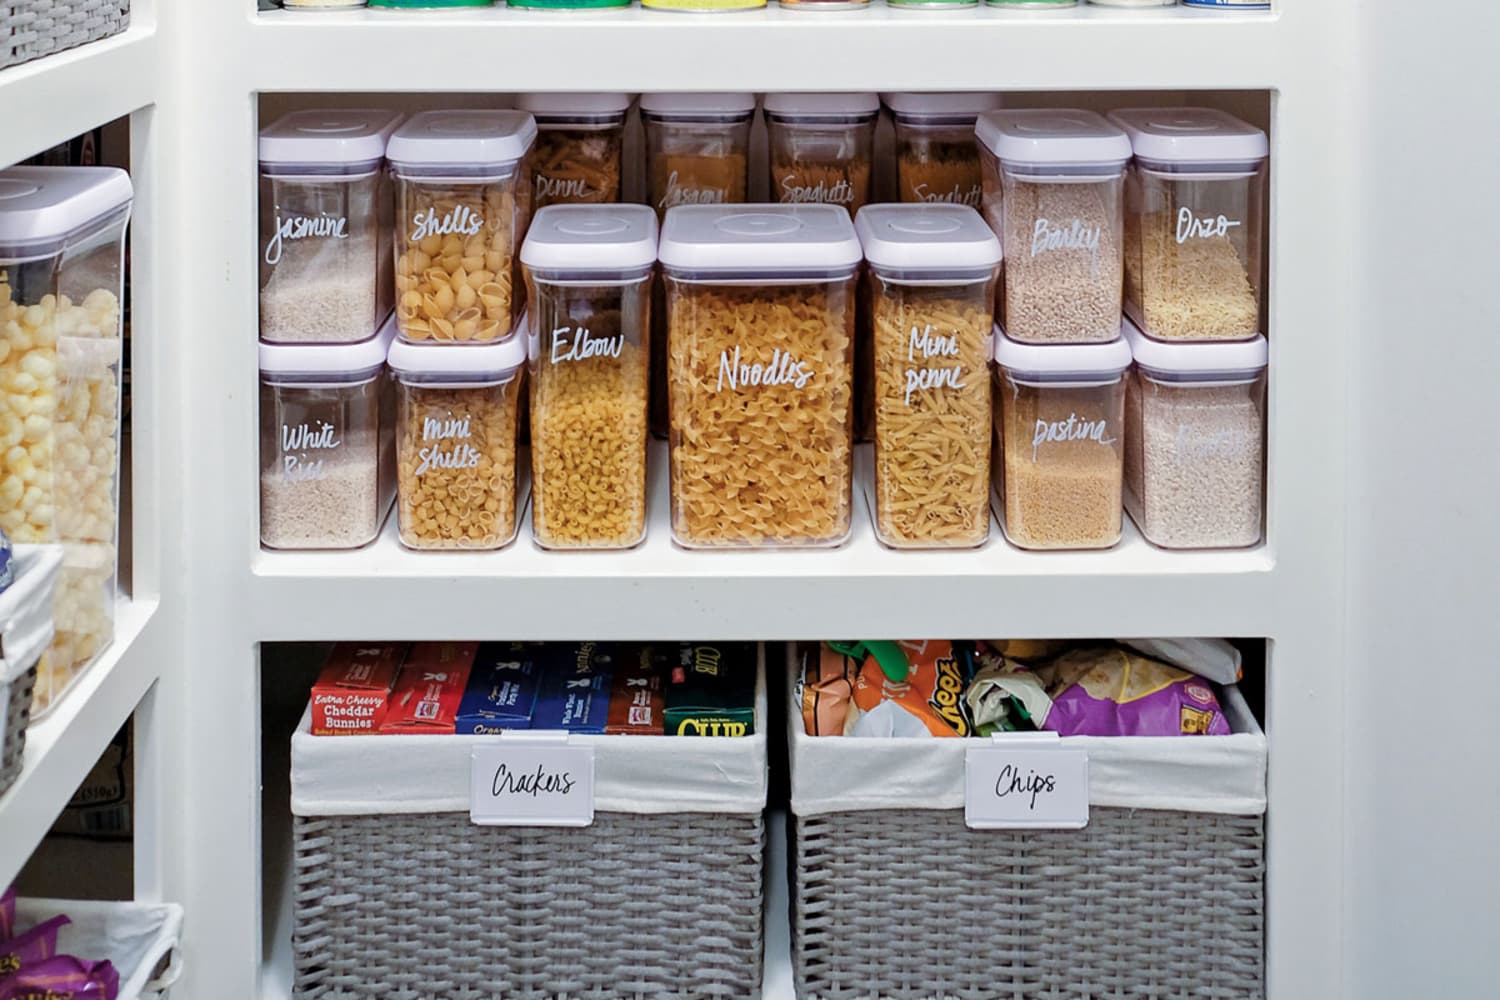 25 Pantry Organization Ideas for Better Storage Space - Parade